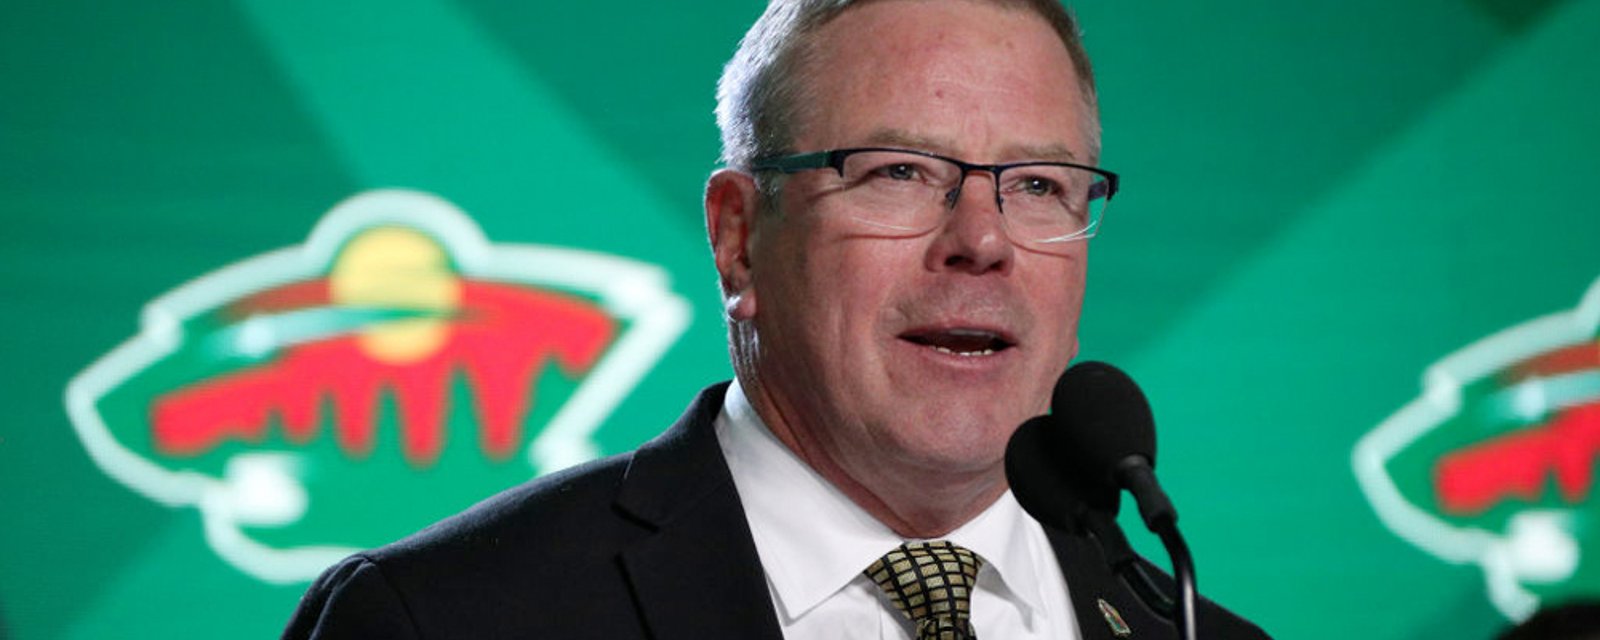 Disgraced former Wild GM Fenton is back in the NHL